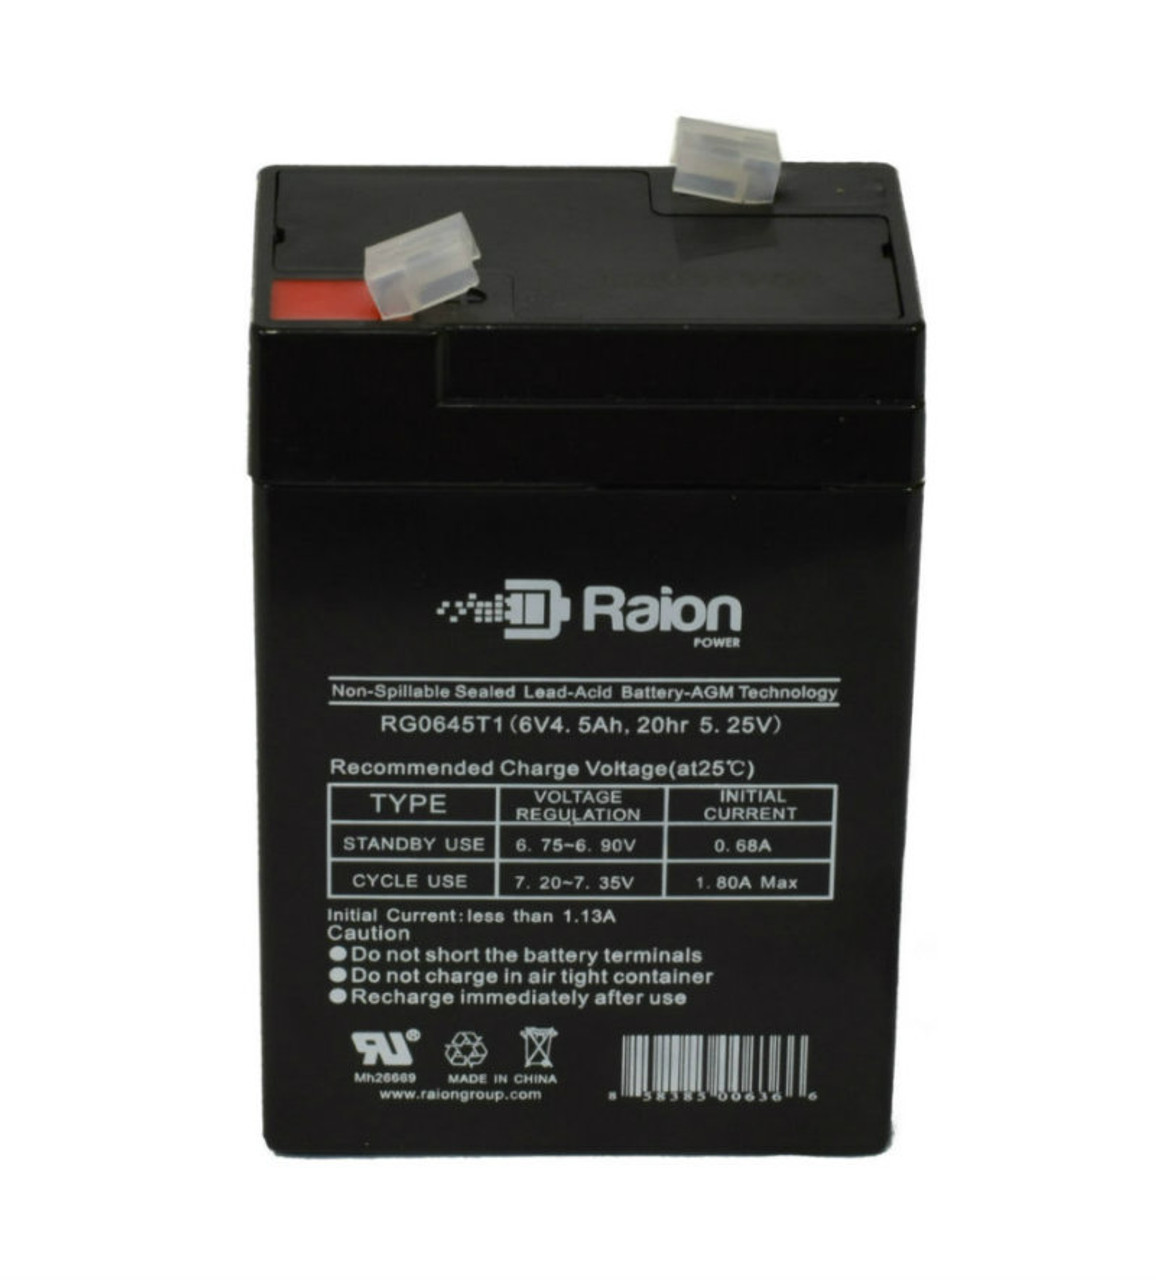 Raion Power RG0645T1 Replacement Battery Cartridge for Peg Perego IGMD0005 6V Mini Ducati